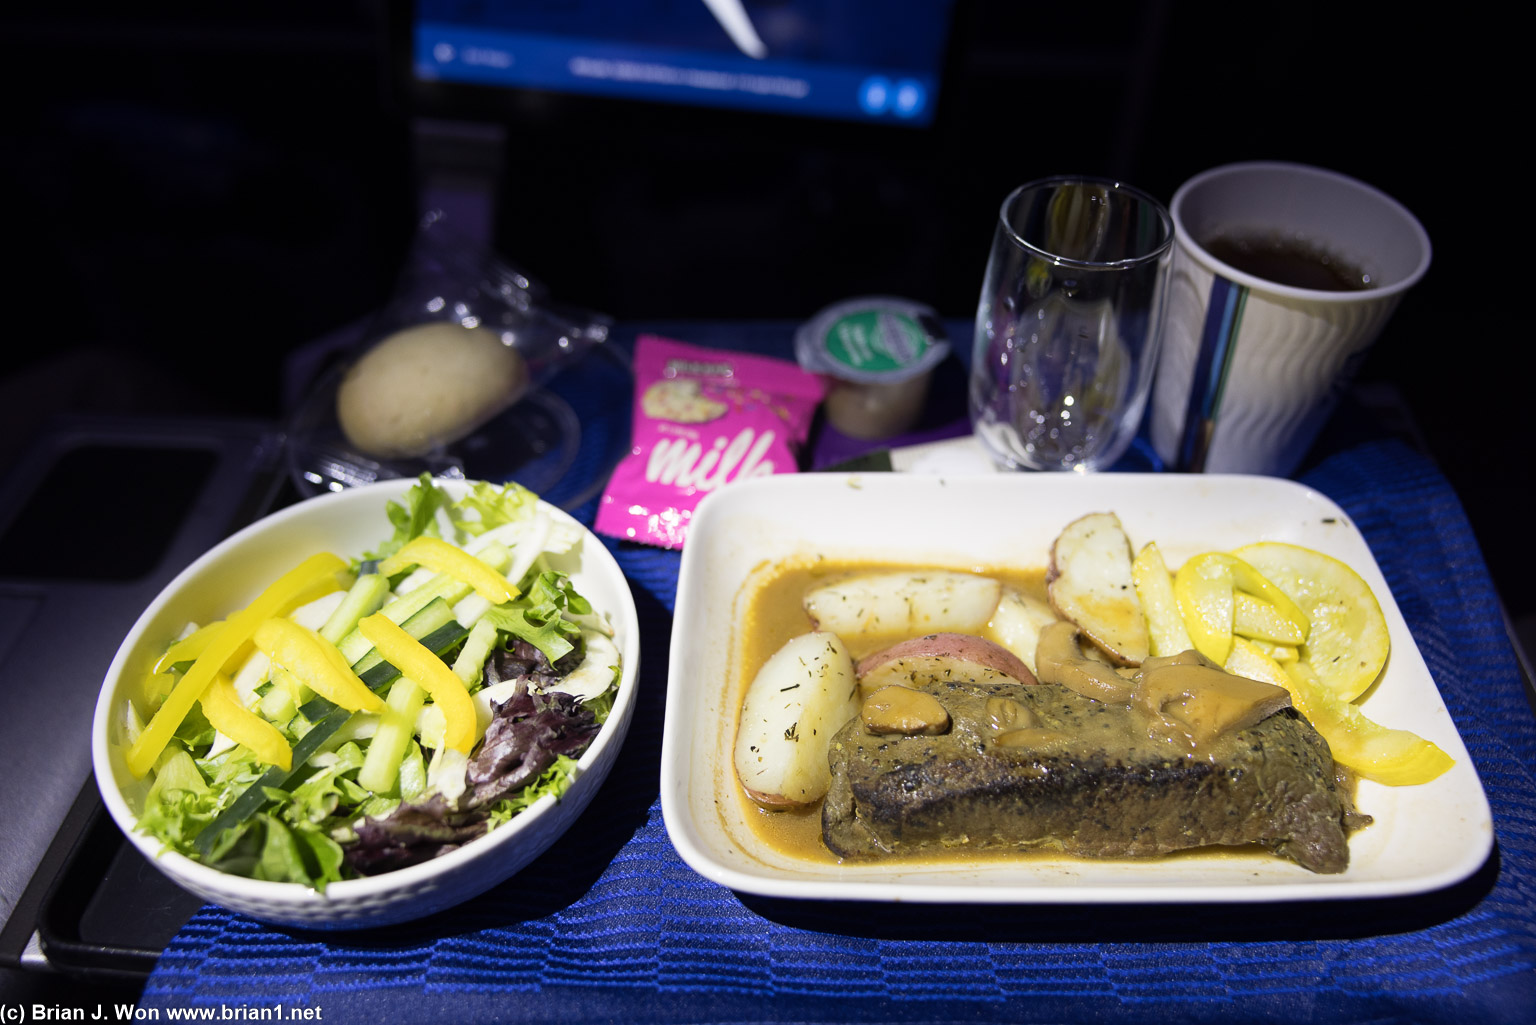 Premium economy meal of beef. Actually not bad, but not good either.